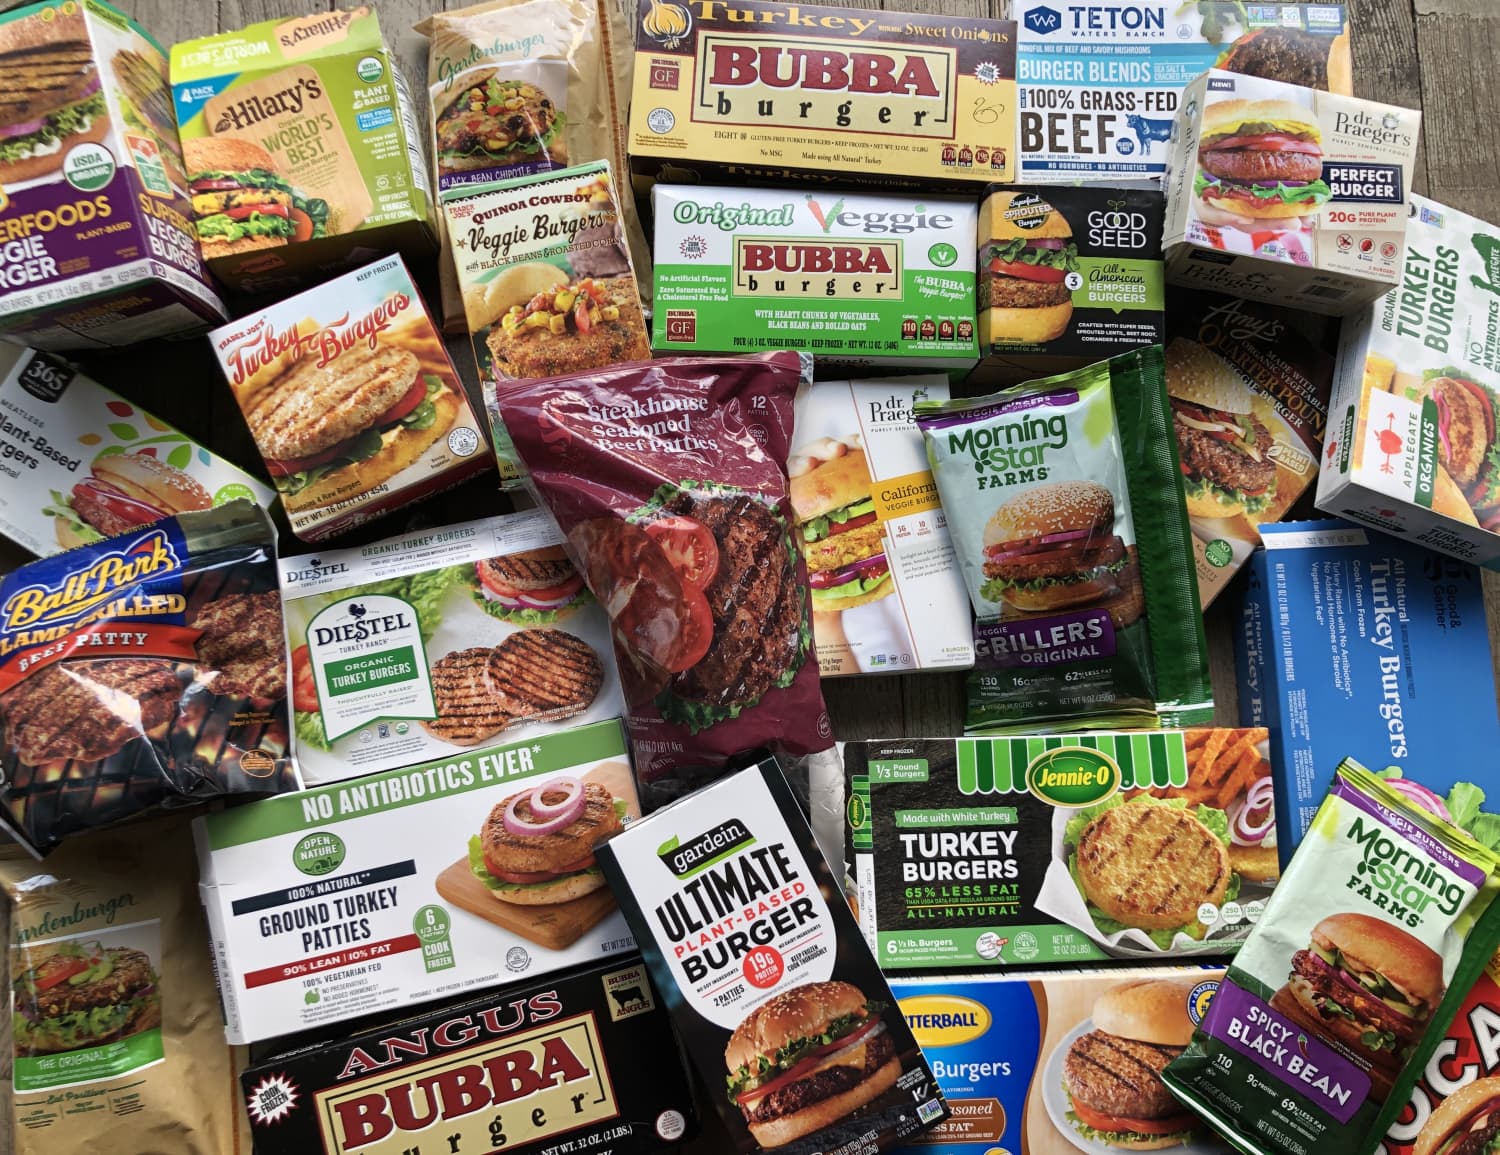 I Tried 27 Different Frozen Burger Patties and These Are the Very Best Ones